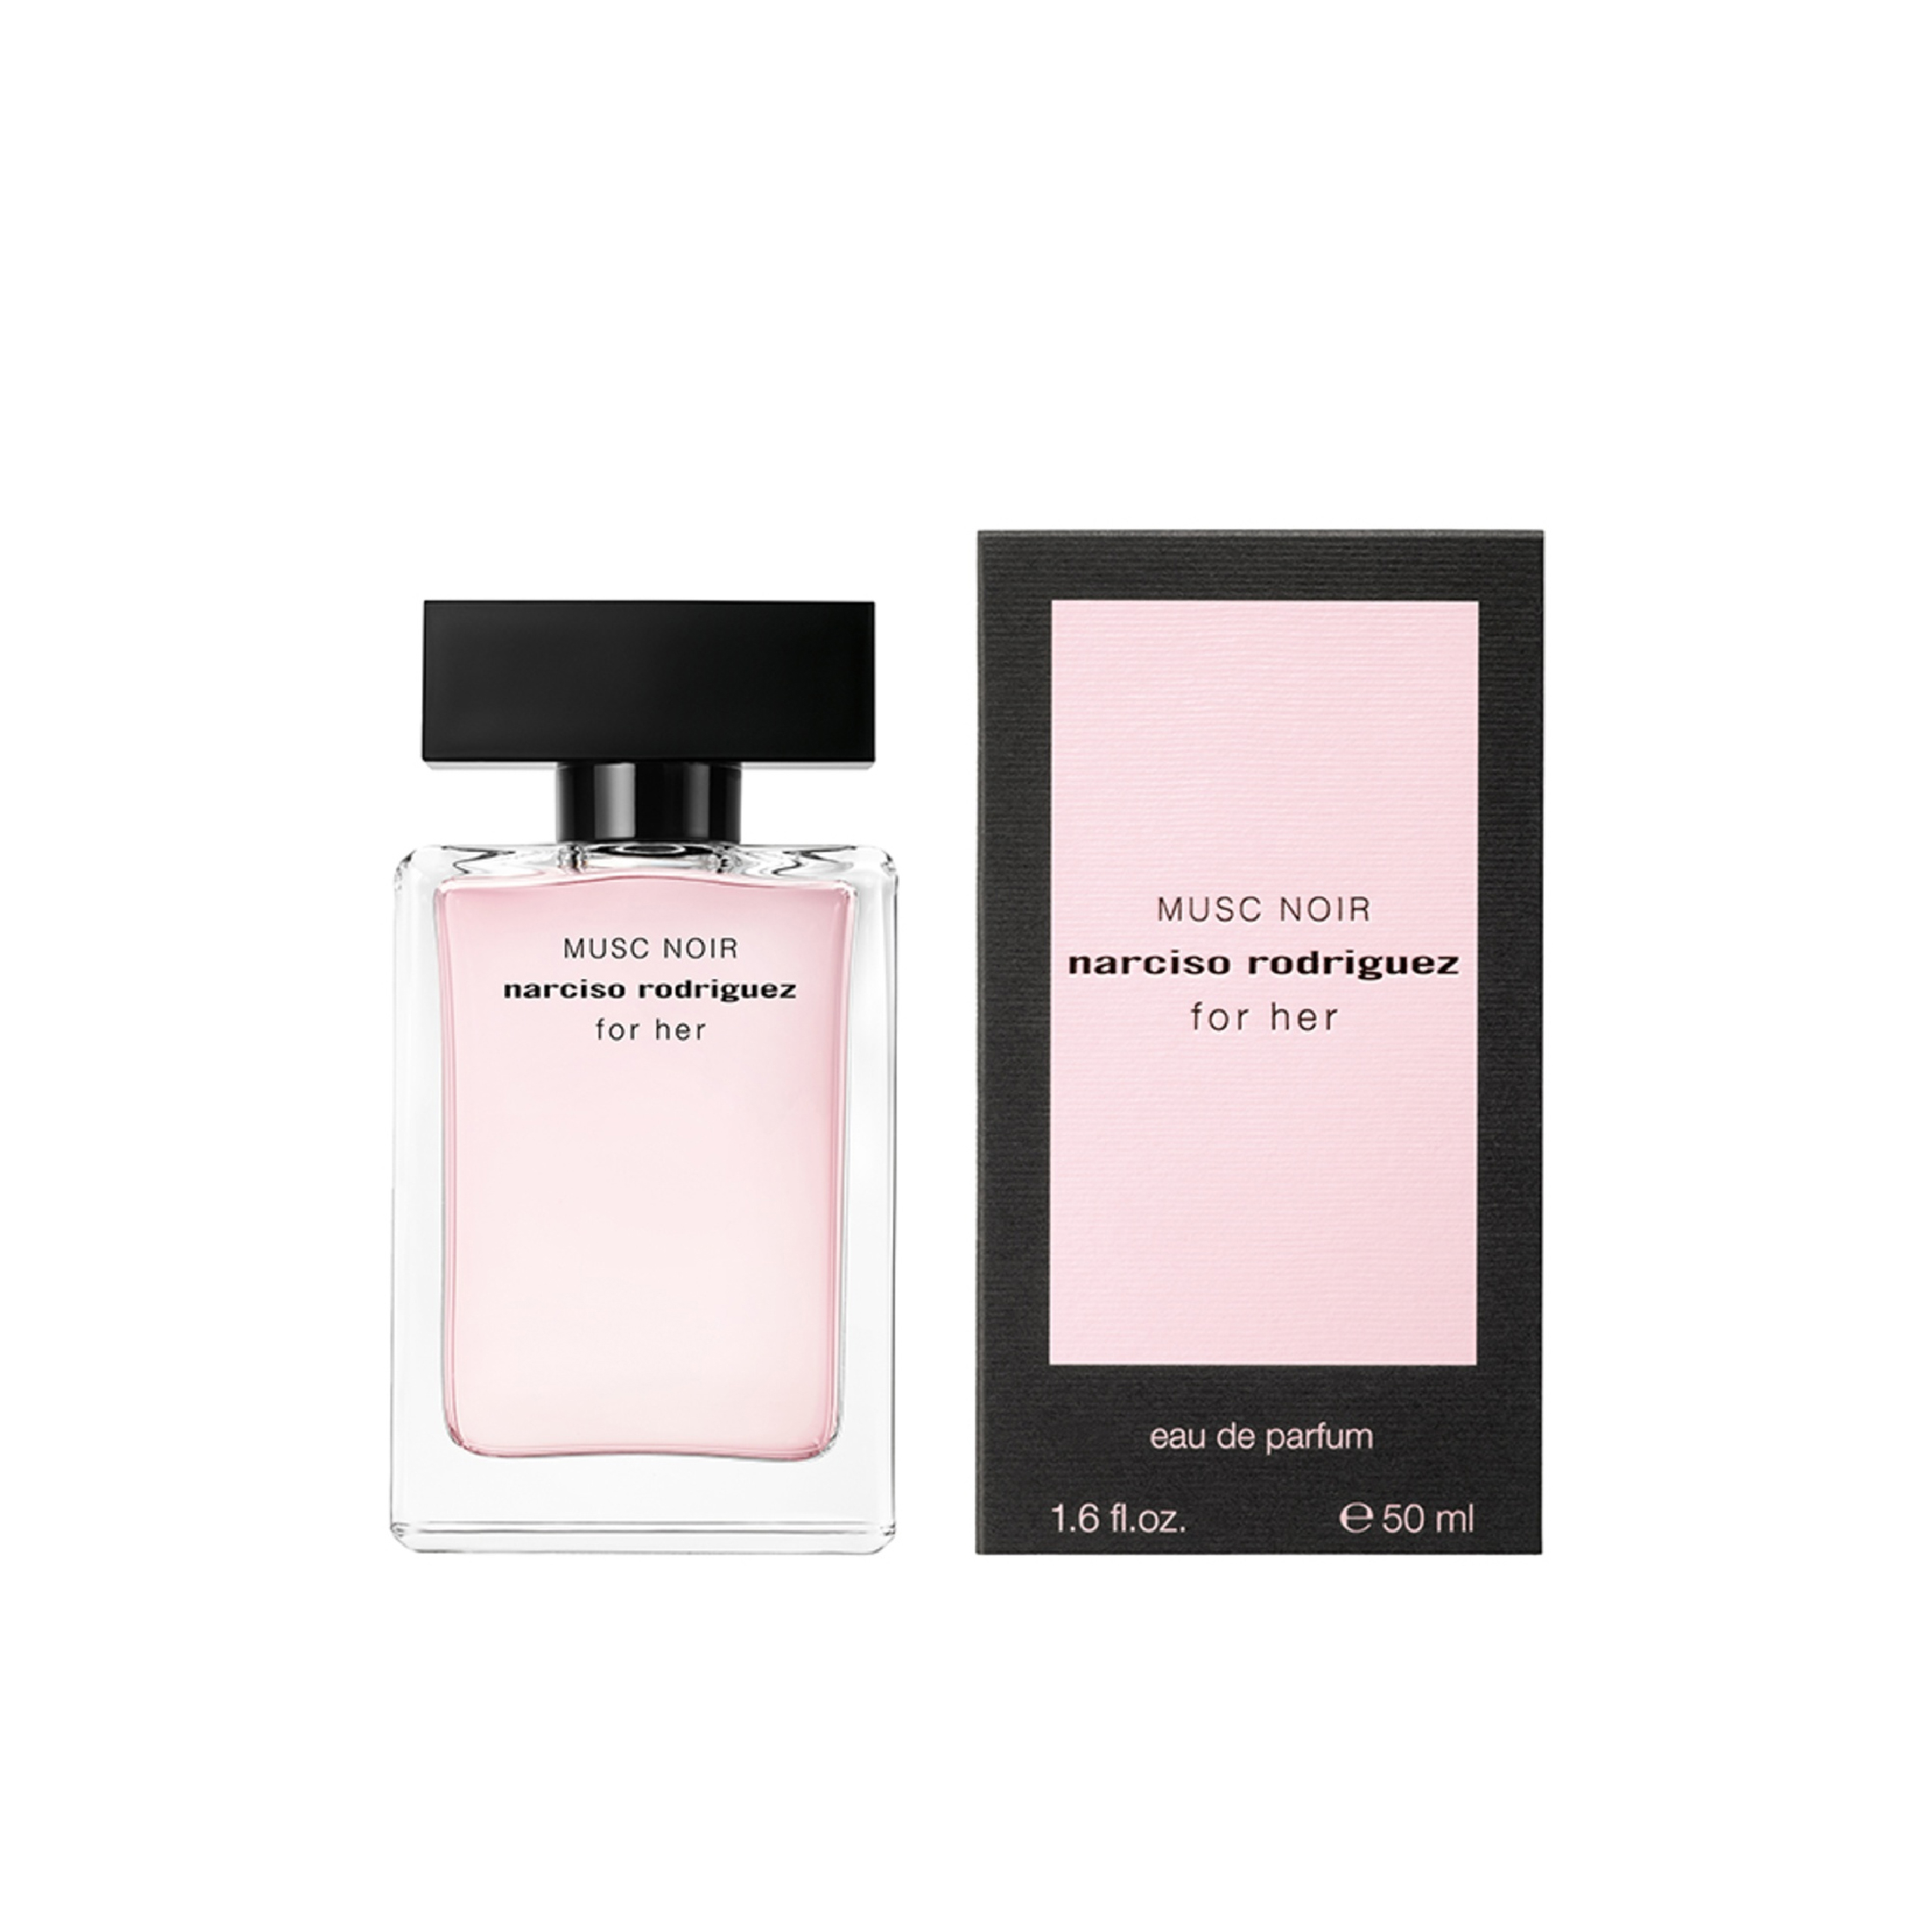 NARCISO RODRIGUEZ FOR HER MUSC NOIR EDP 50ML